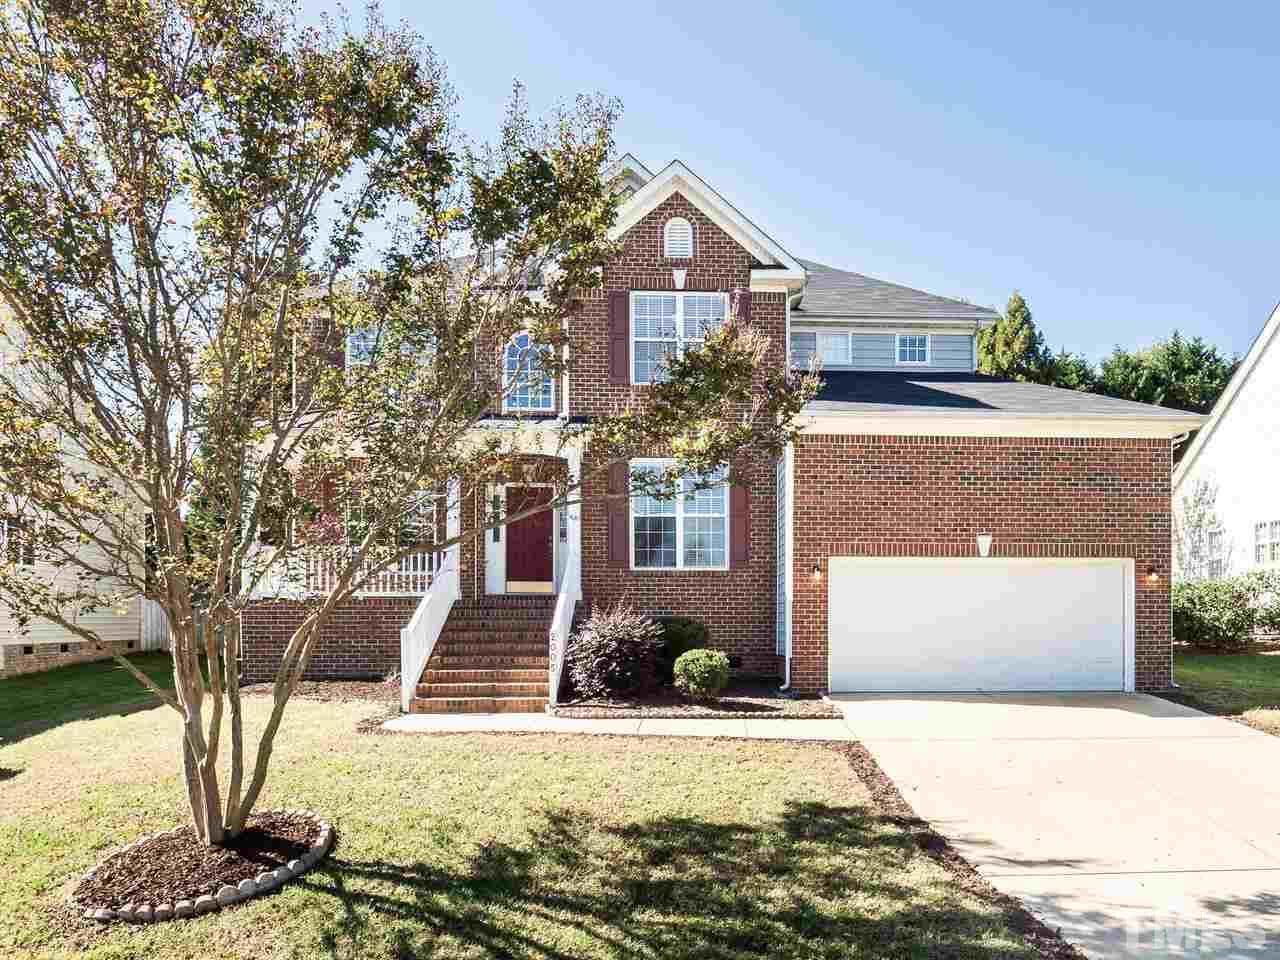 2005 Ambrose Park Ln, Cary, NC 27518 | MLS# 2348498 | Redfin